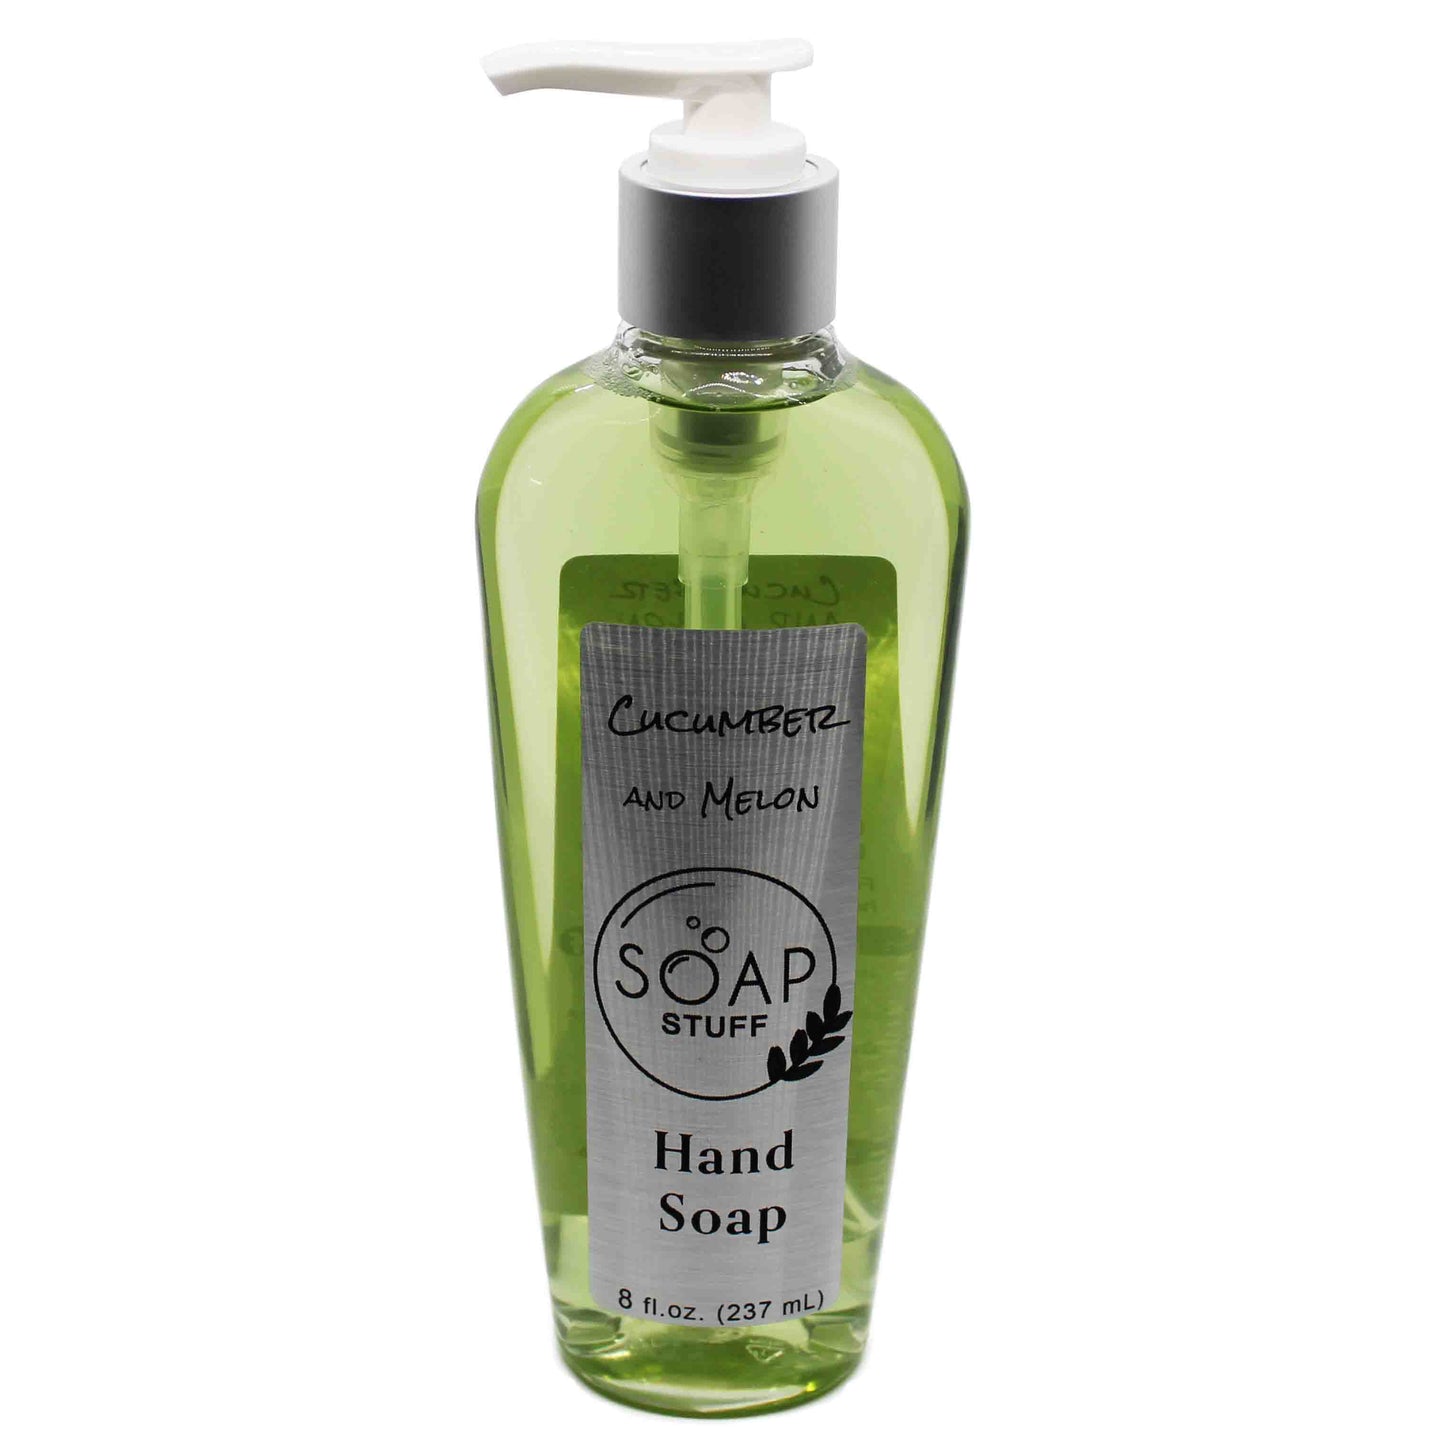 Cucumber and Melon Hand Soap (8 oz.)